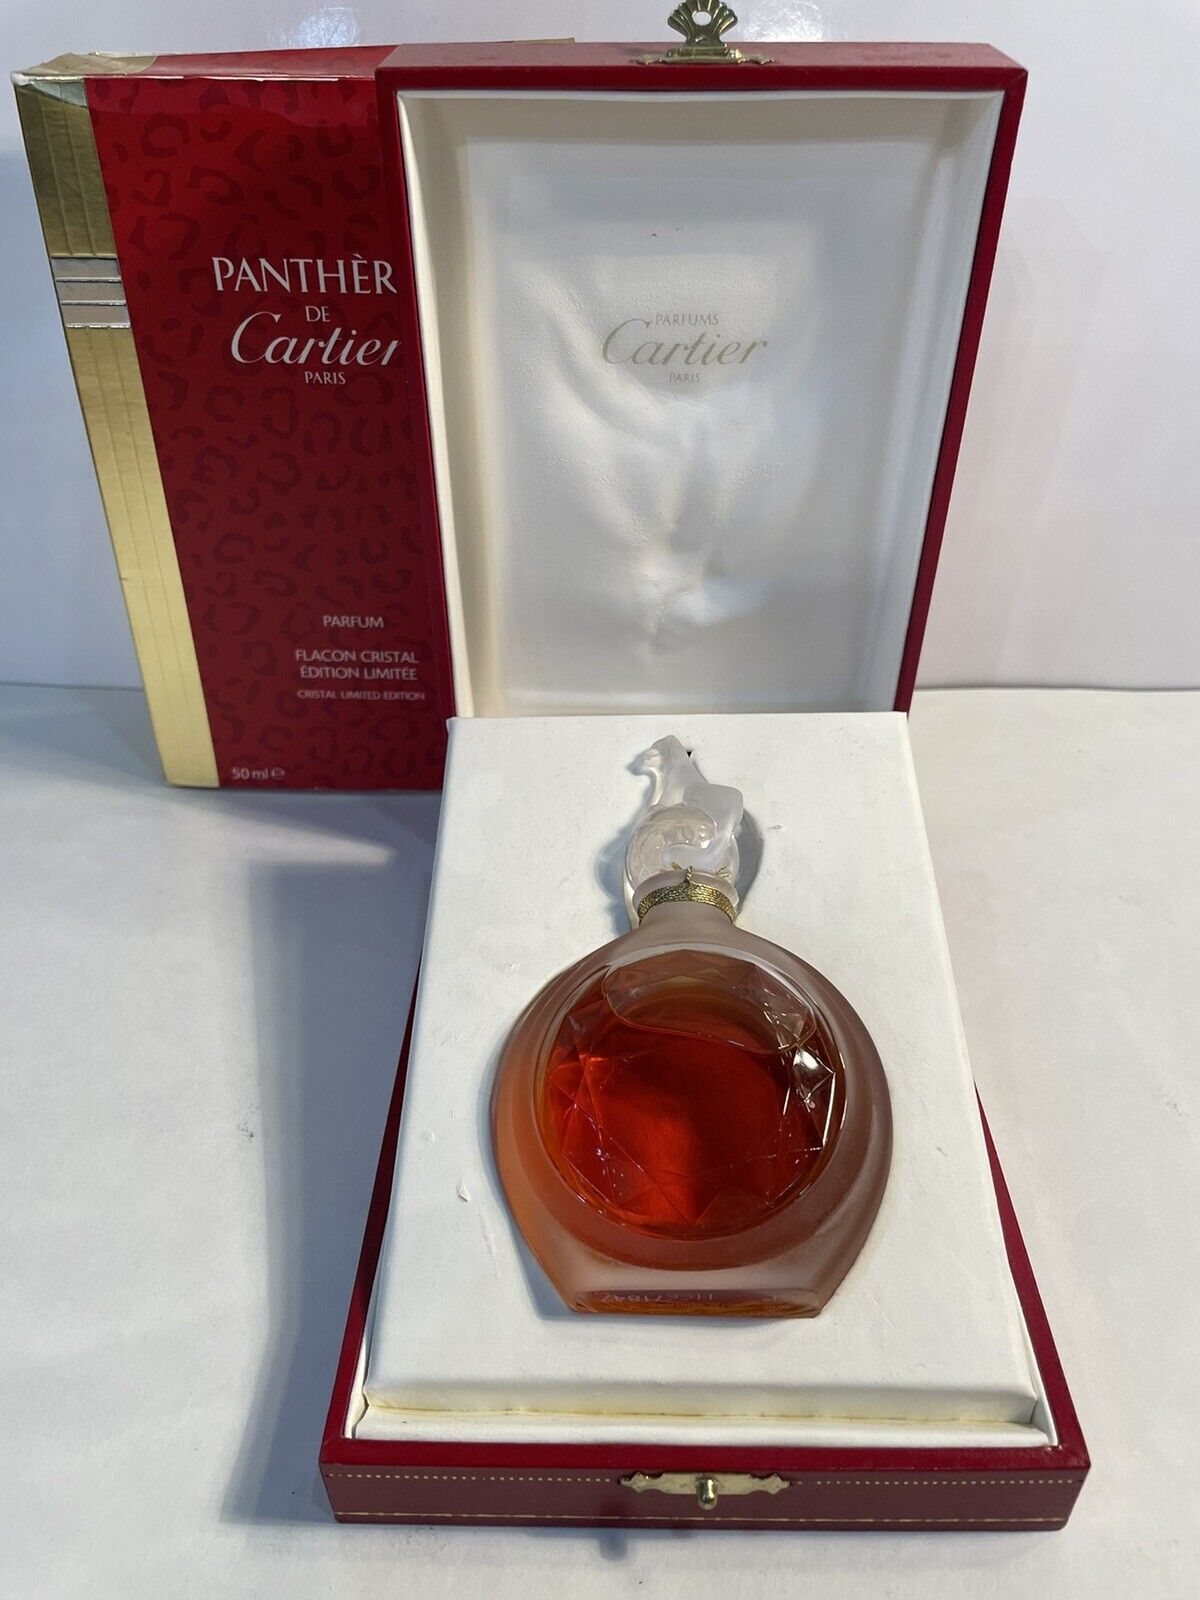 Rare Cartier Crystal Ltd. Edition 1.6 Oz. Perfume Bottle “Panthere” New w/Boxes